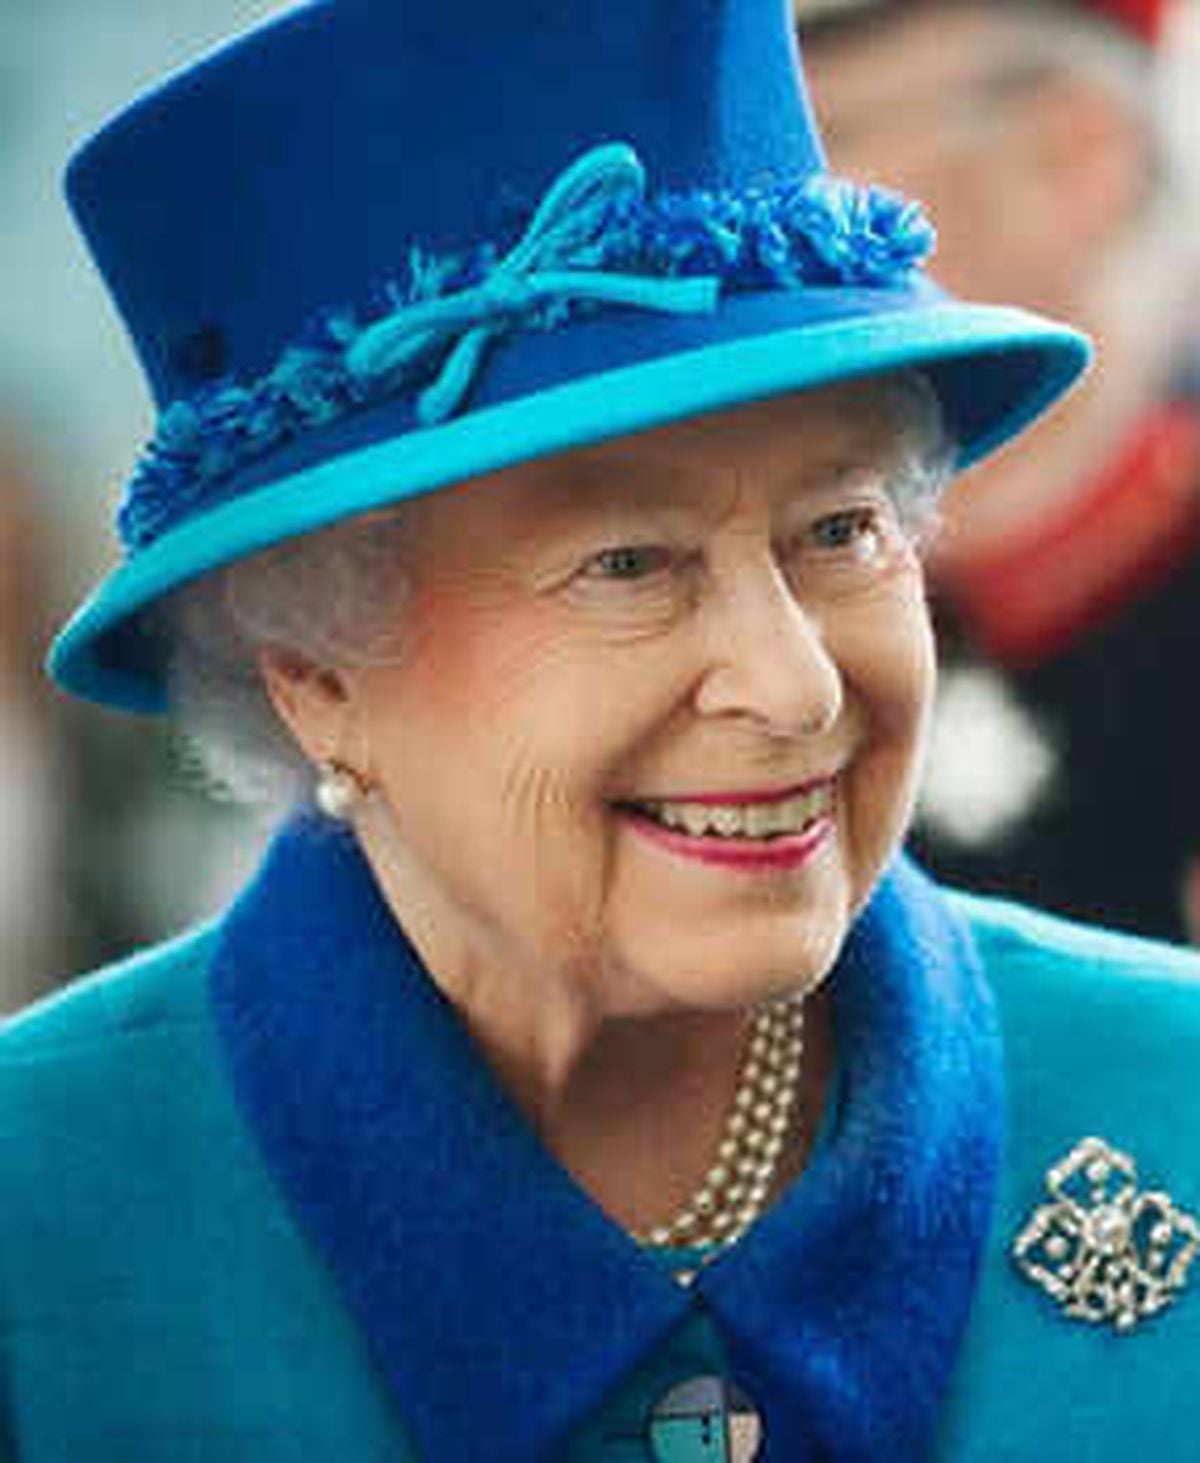 The Queen turned 90 in April